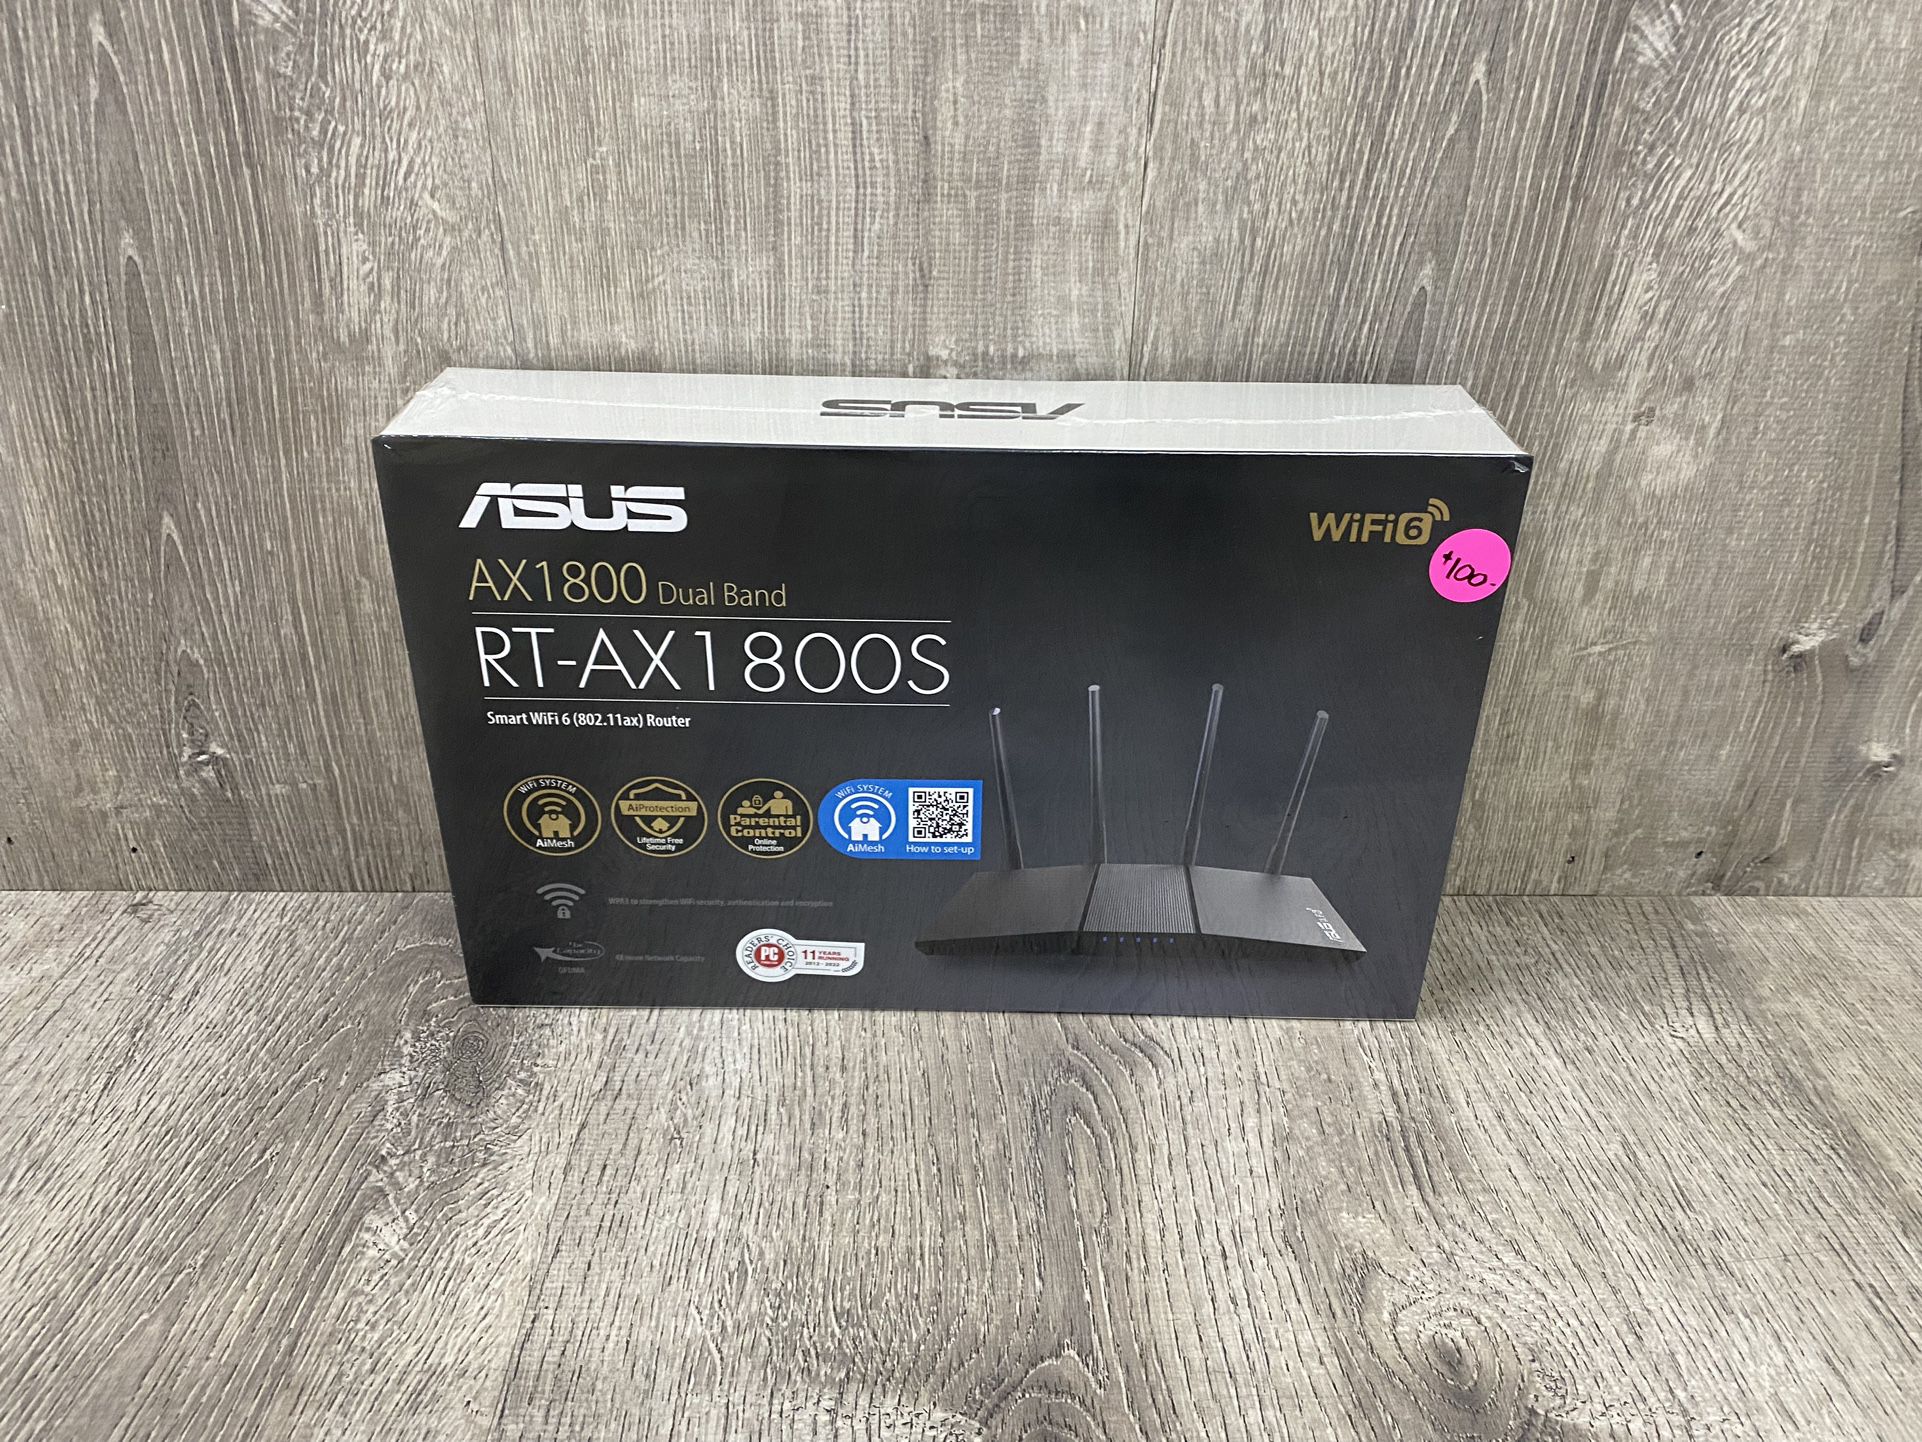 ASUS RT-AX1800S SMART WIFI ROUTER